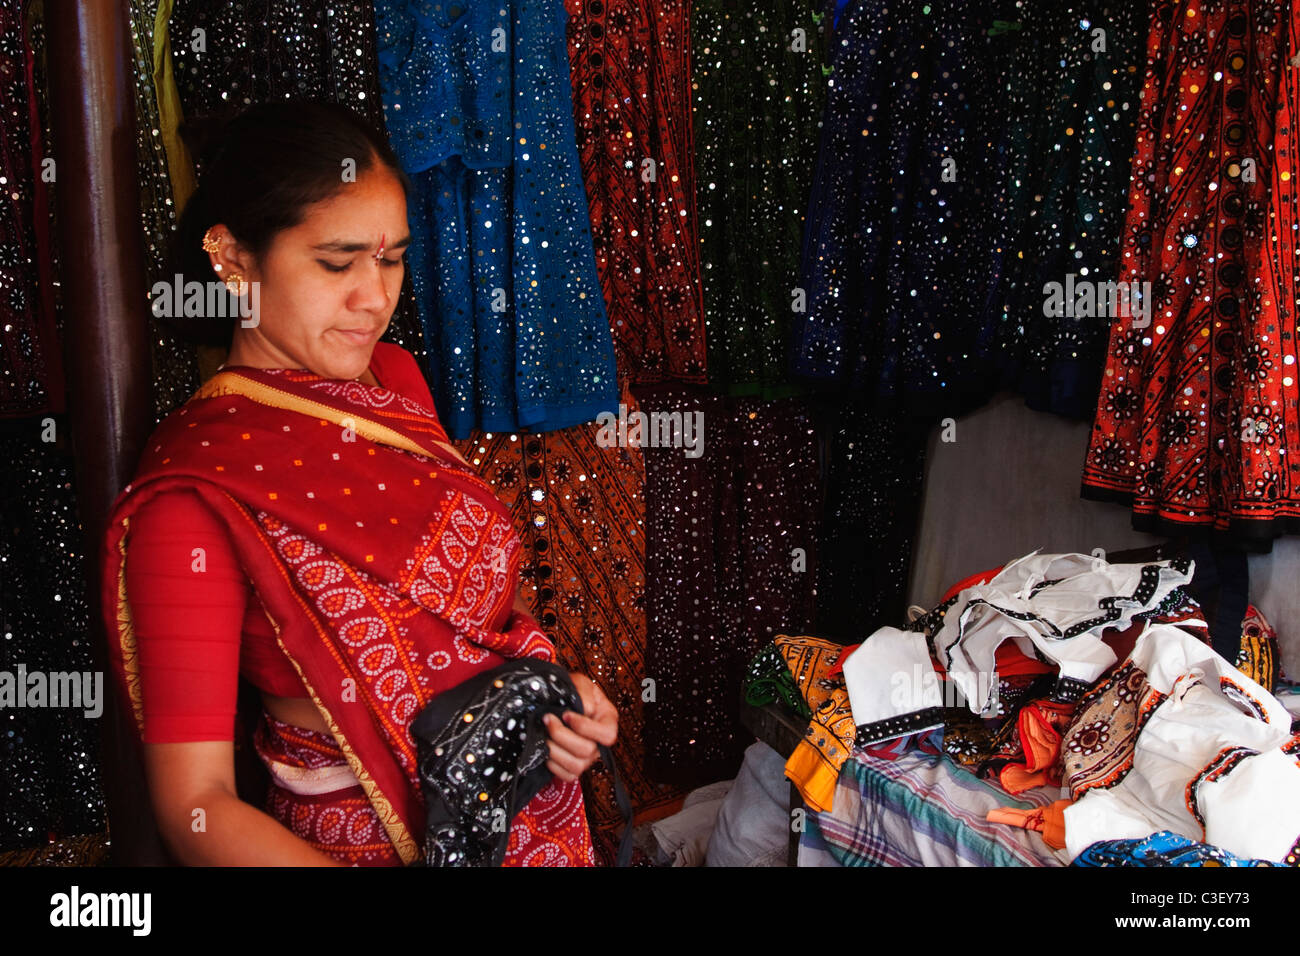 Woman standing at a clothing store, New Delhi, India Stock Photo